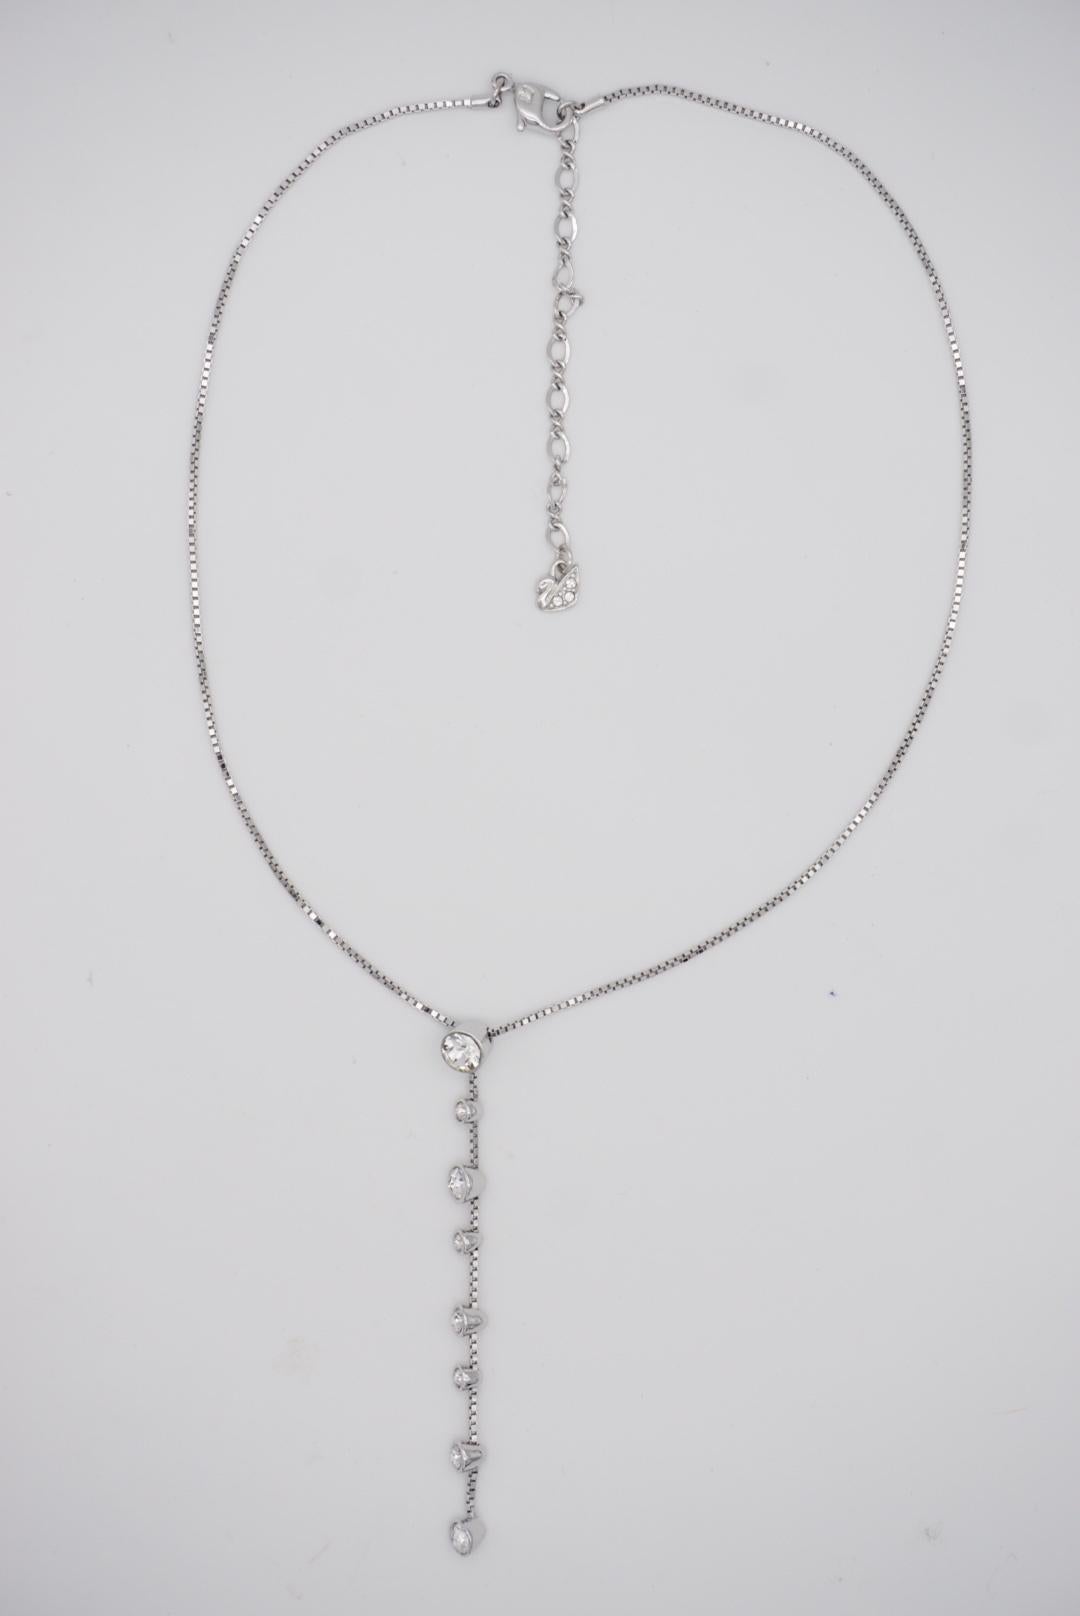 Swarovski Clear Crystals Floating Stones Tassel Chain Pendant Long Necklace For Sale 1